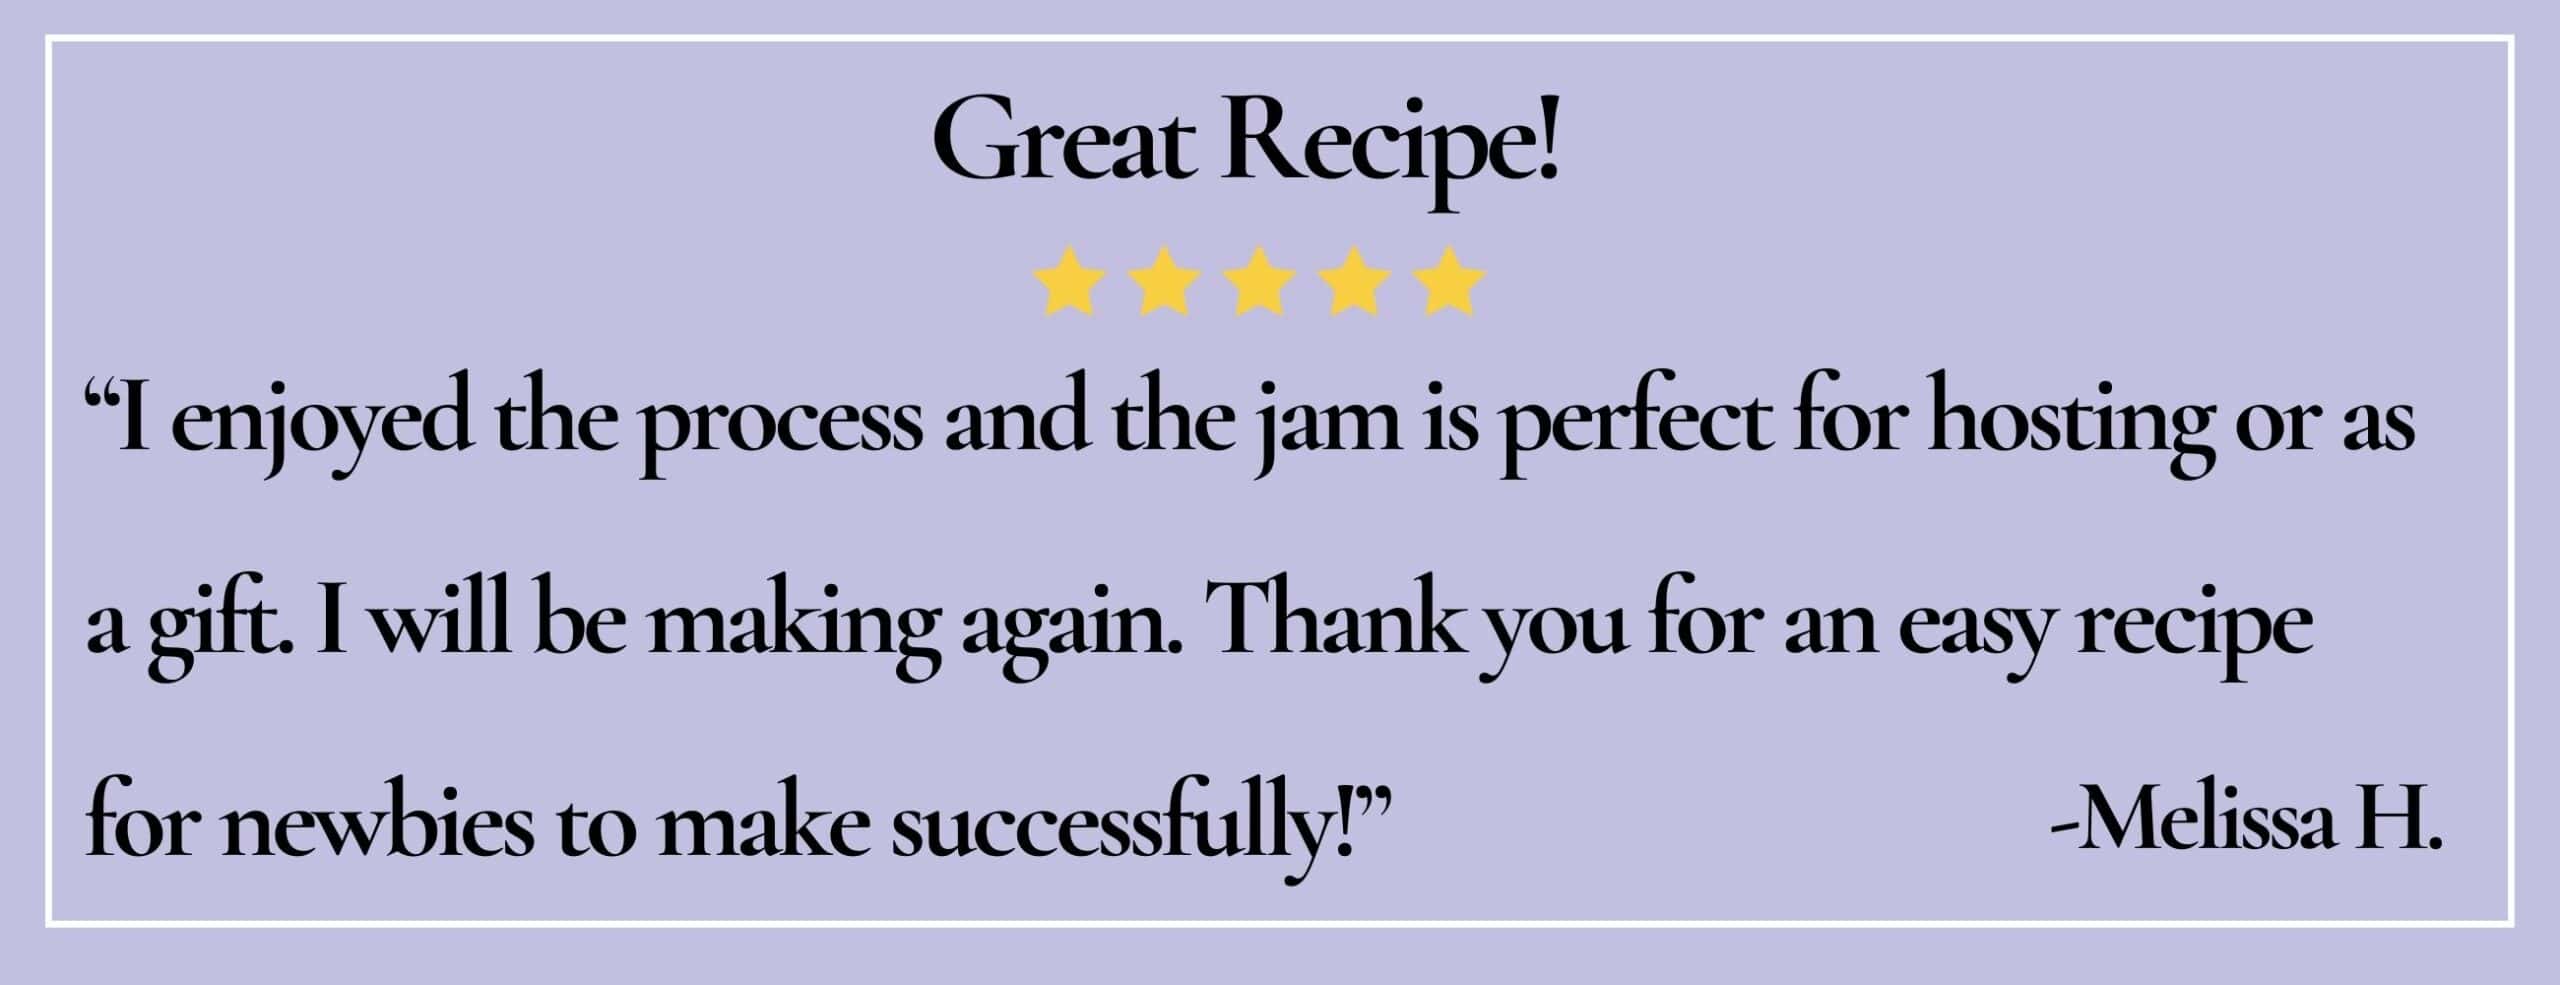 text box with paraphrase: Great Recipe! I enjoyed the process and the jam is perfect for hosting or as a gift. -Melissa H.